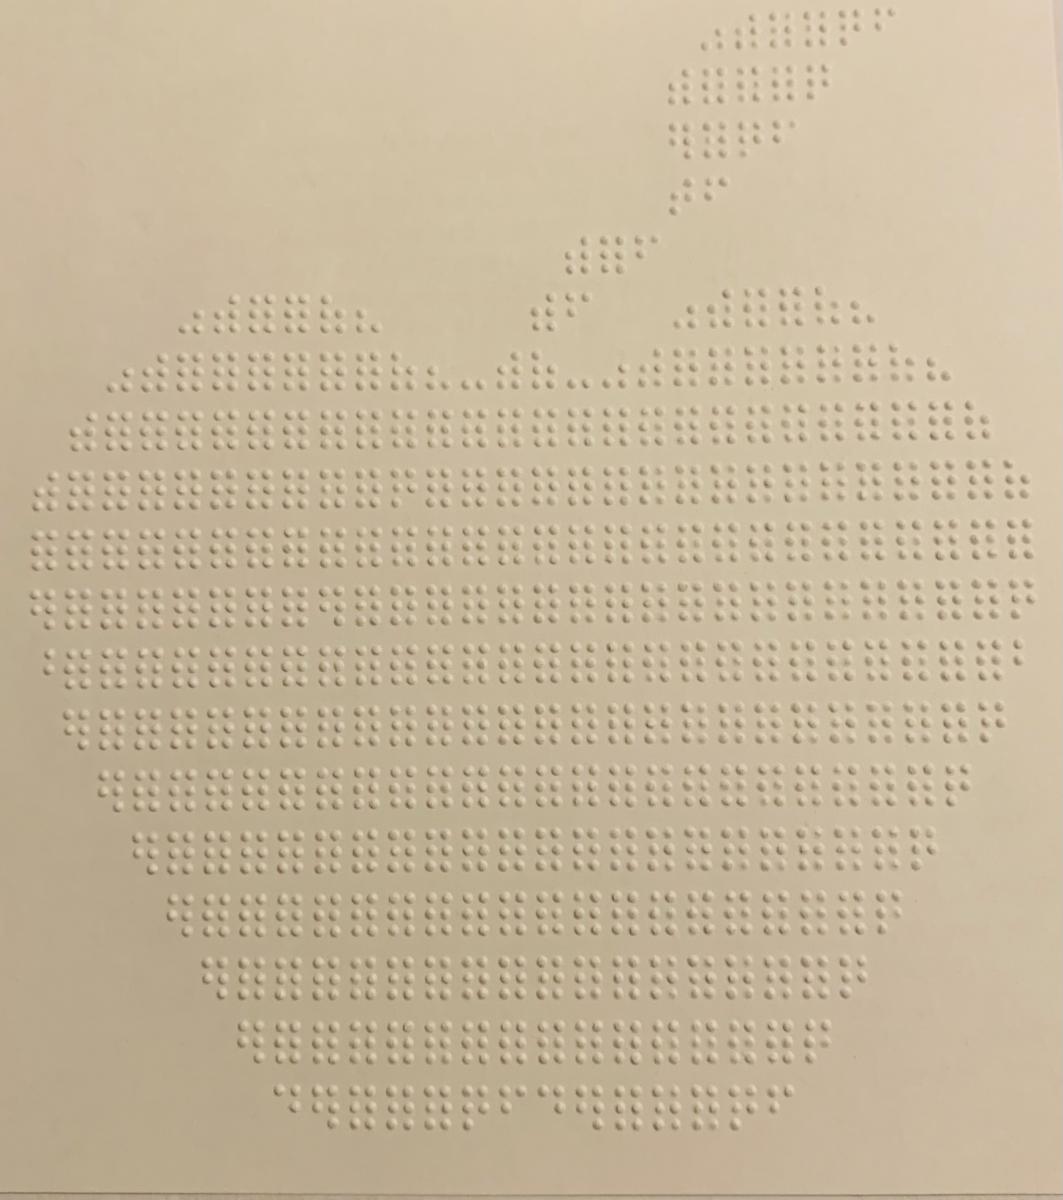 Braille drawing of an apple